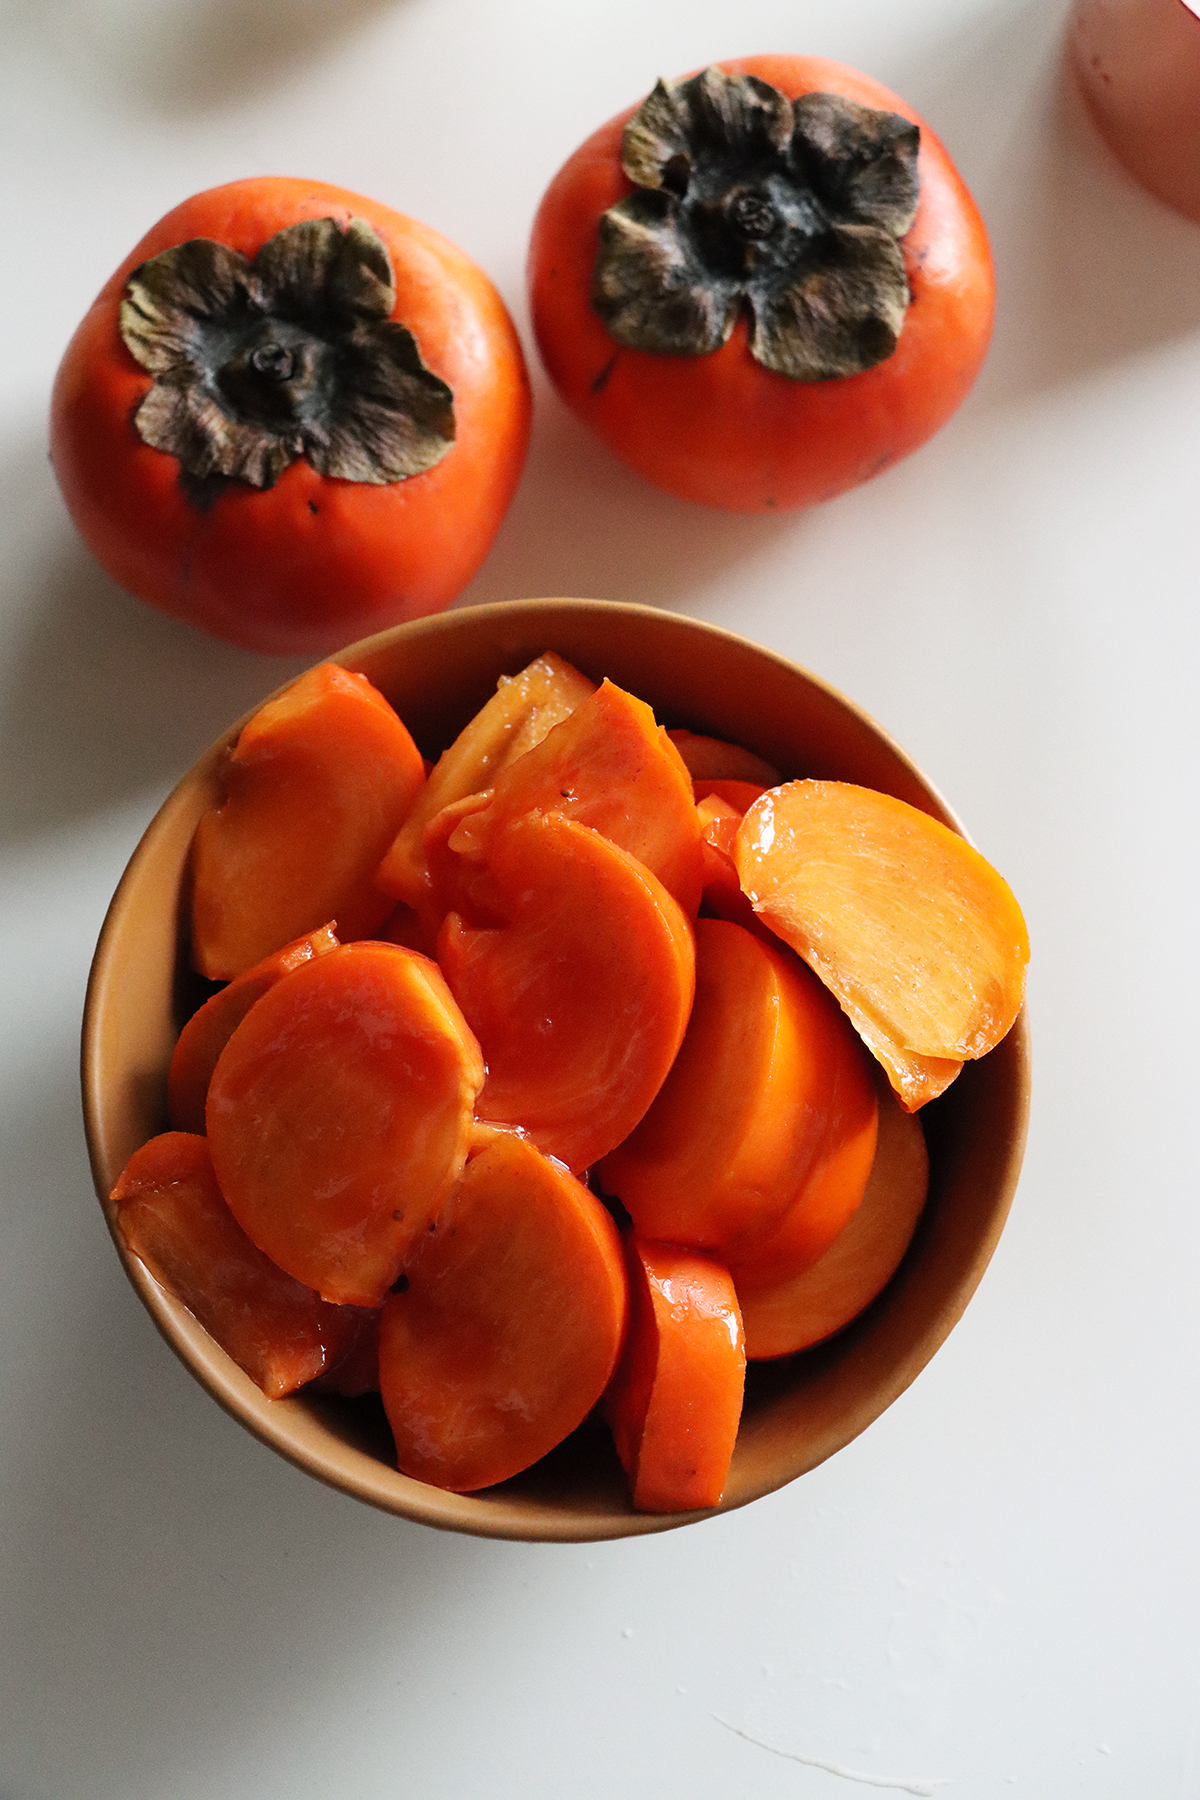 A bowl of sliced persimmons on a white table along with two whole persimmons.